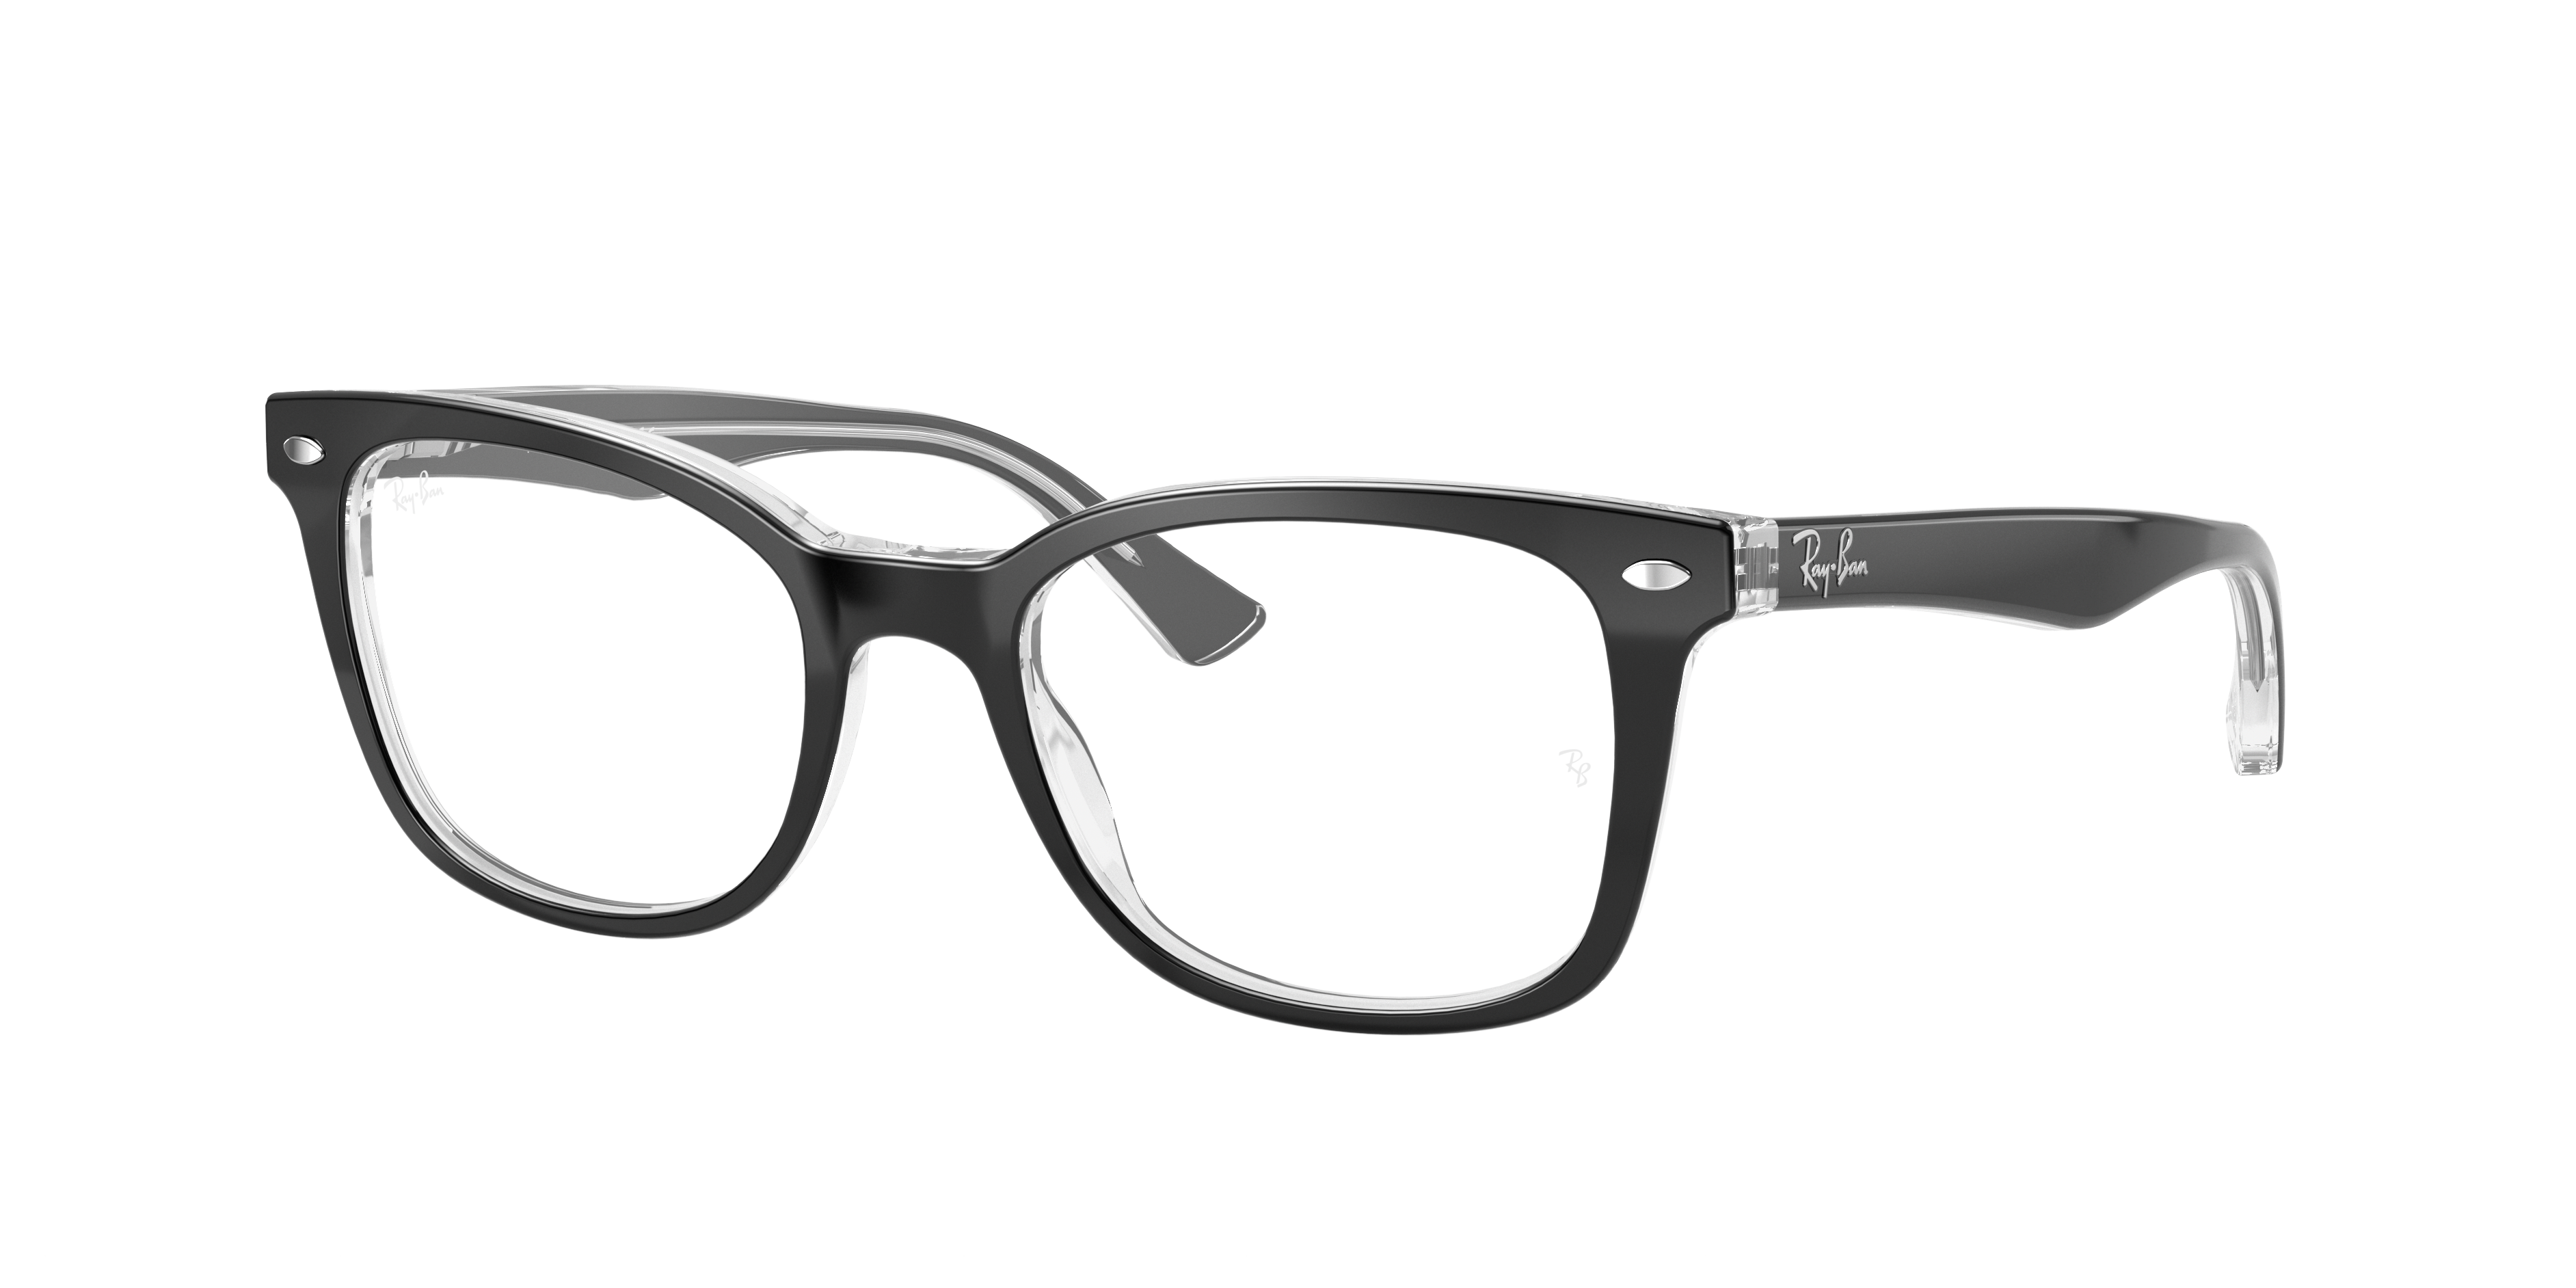 Ray-Ban 0RX5285 in Black Glasses | OPSM